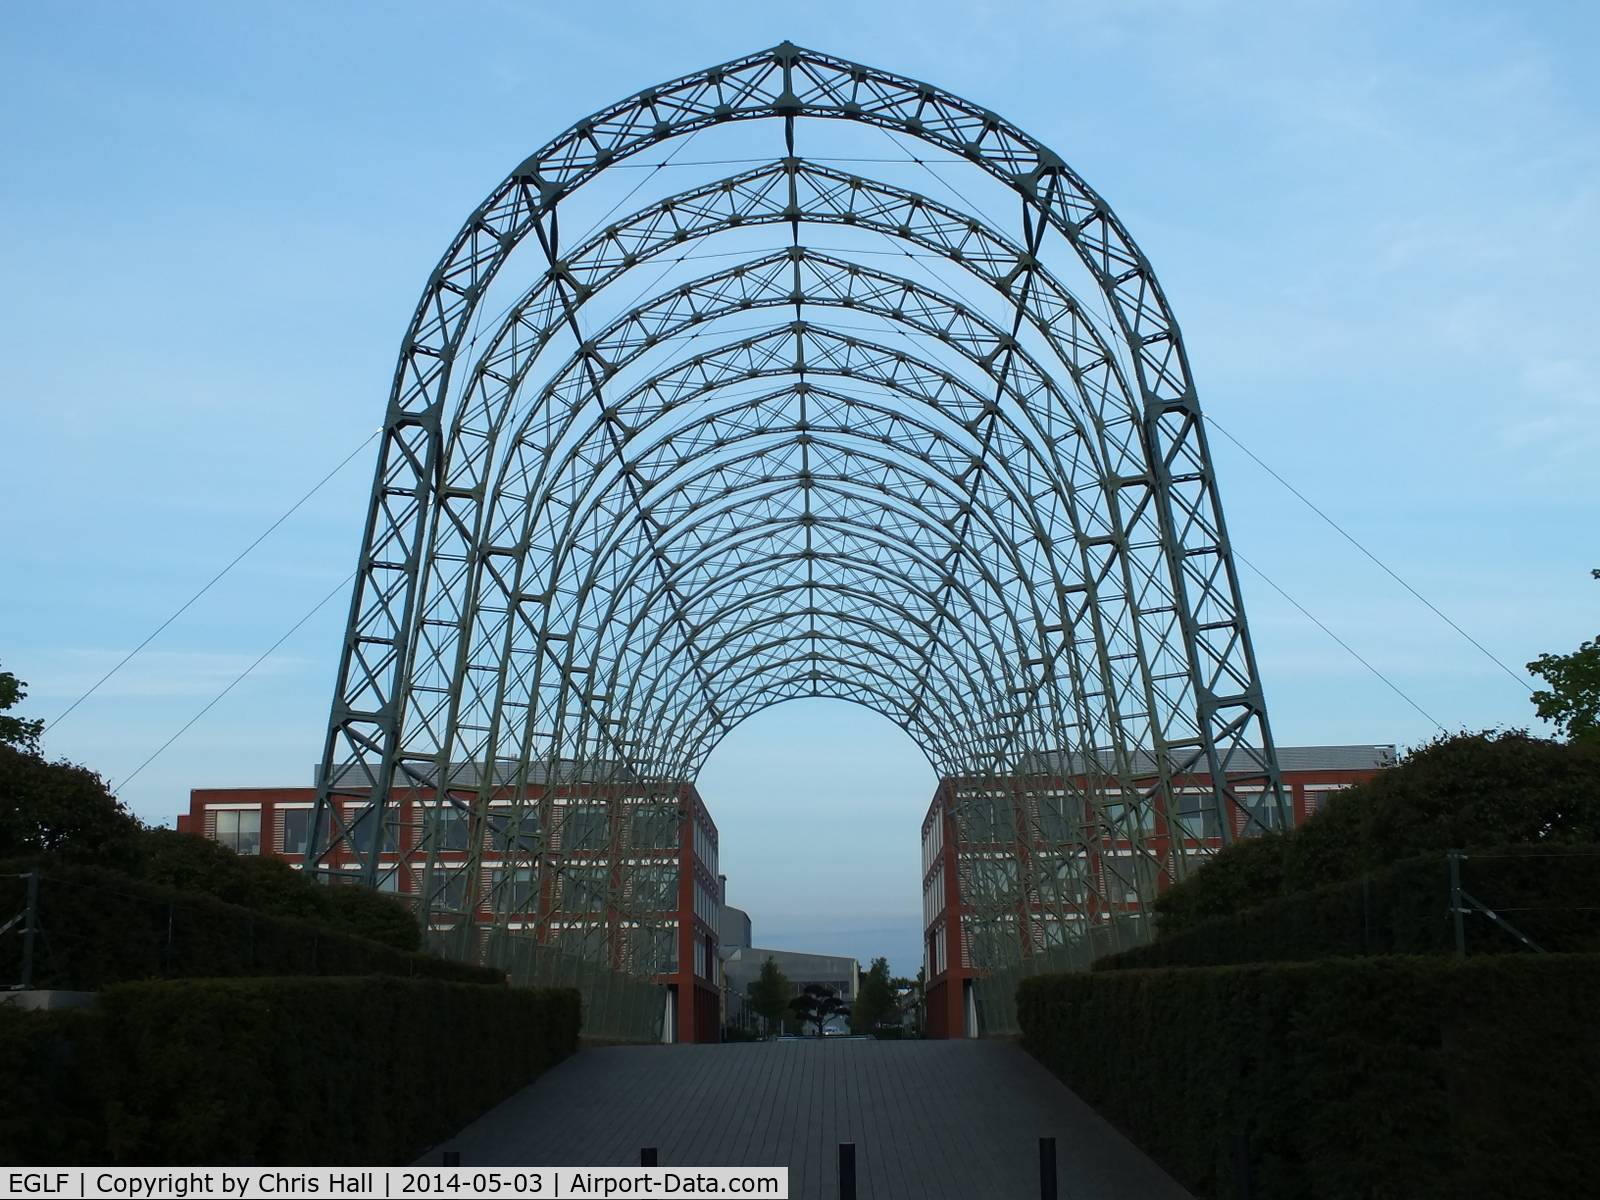 Farnborough Airfield Airport, Farnborough, England United Kingdom (EGLF) - The 260-foot long Portable Airship Hangar made up of 112 riveted lattice frames and bolted together to form the 70ft high structure. It is the centrepiece of the new business park that now occupies part of the former Farnborough Airfield site.